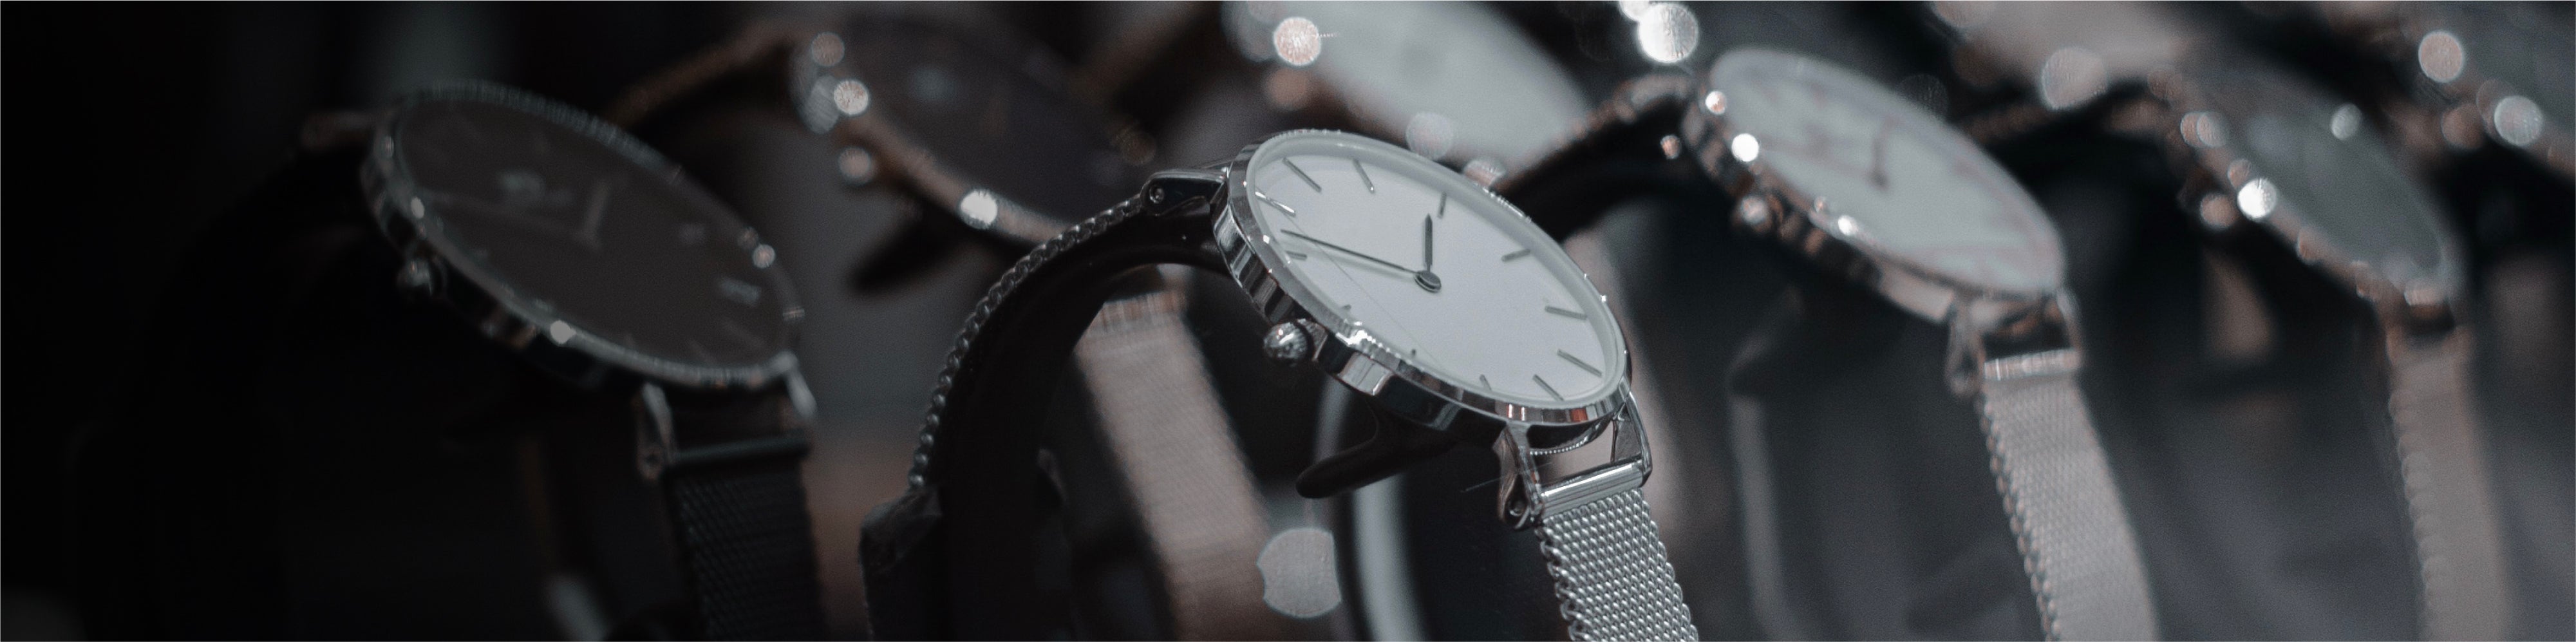 Top 7 Best Watch Brands Collections – Just In Time